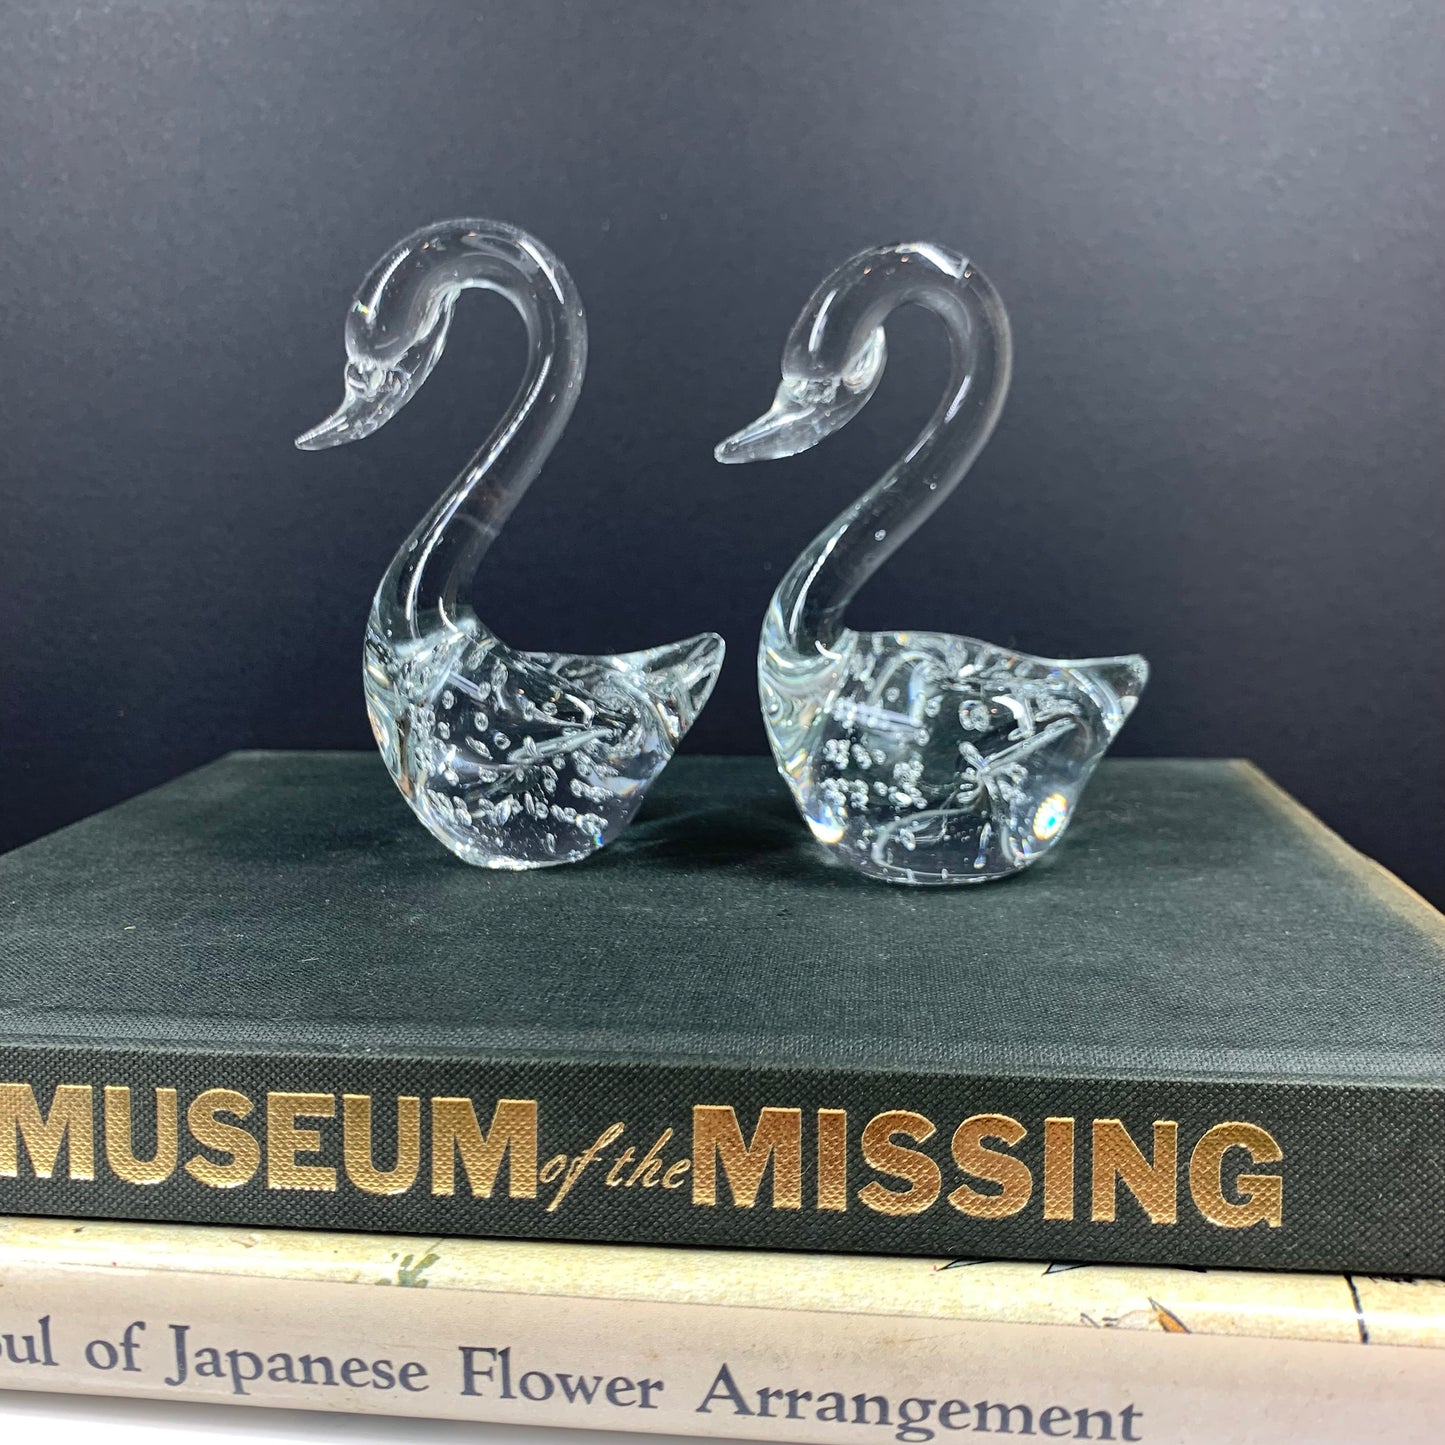 MCM glass swan with controlled bubbles body